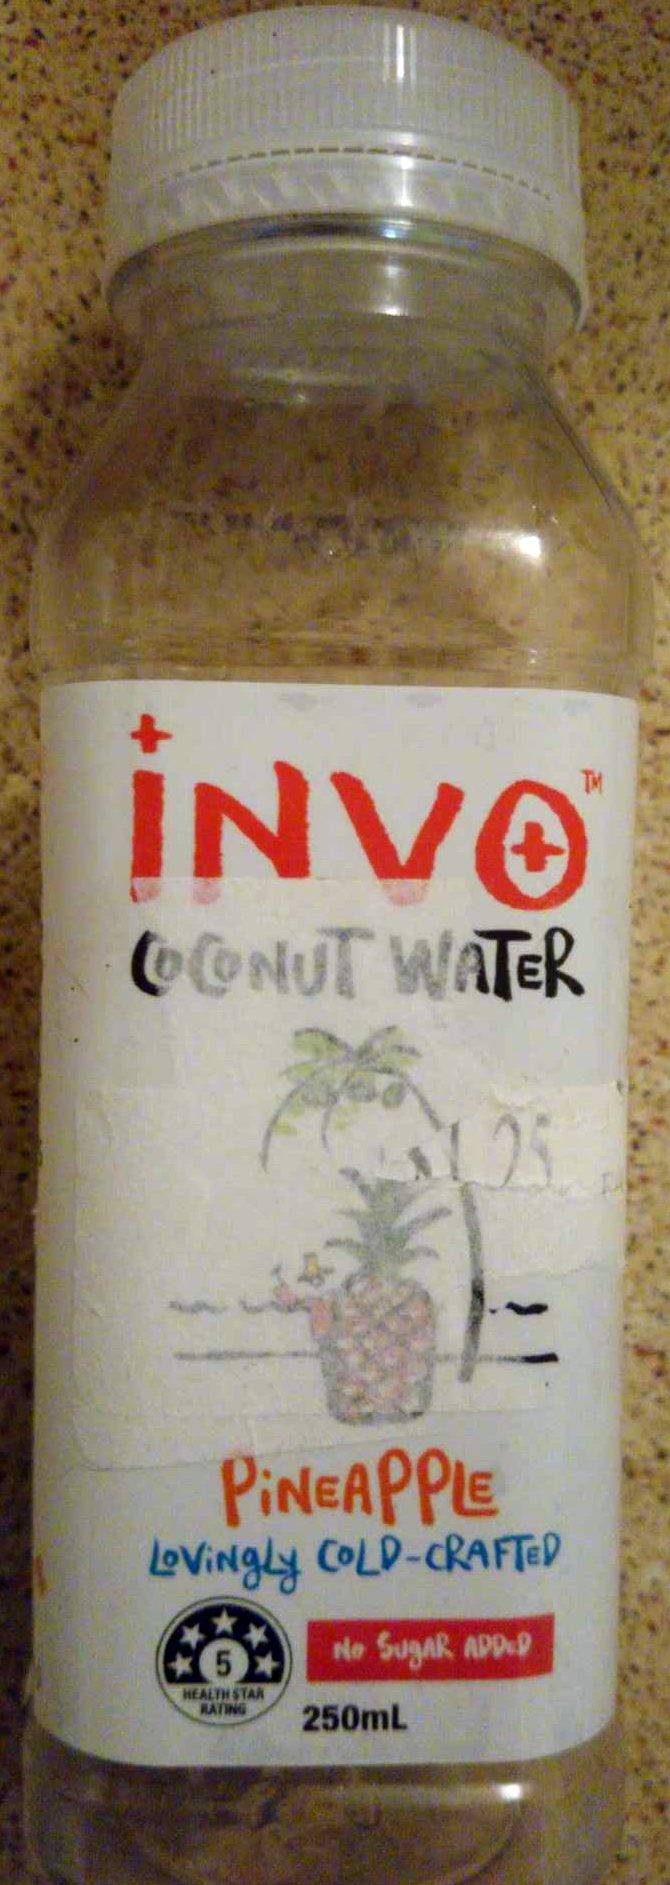 Coconut Water - Pineapple - Product